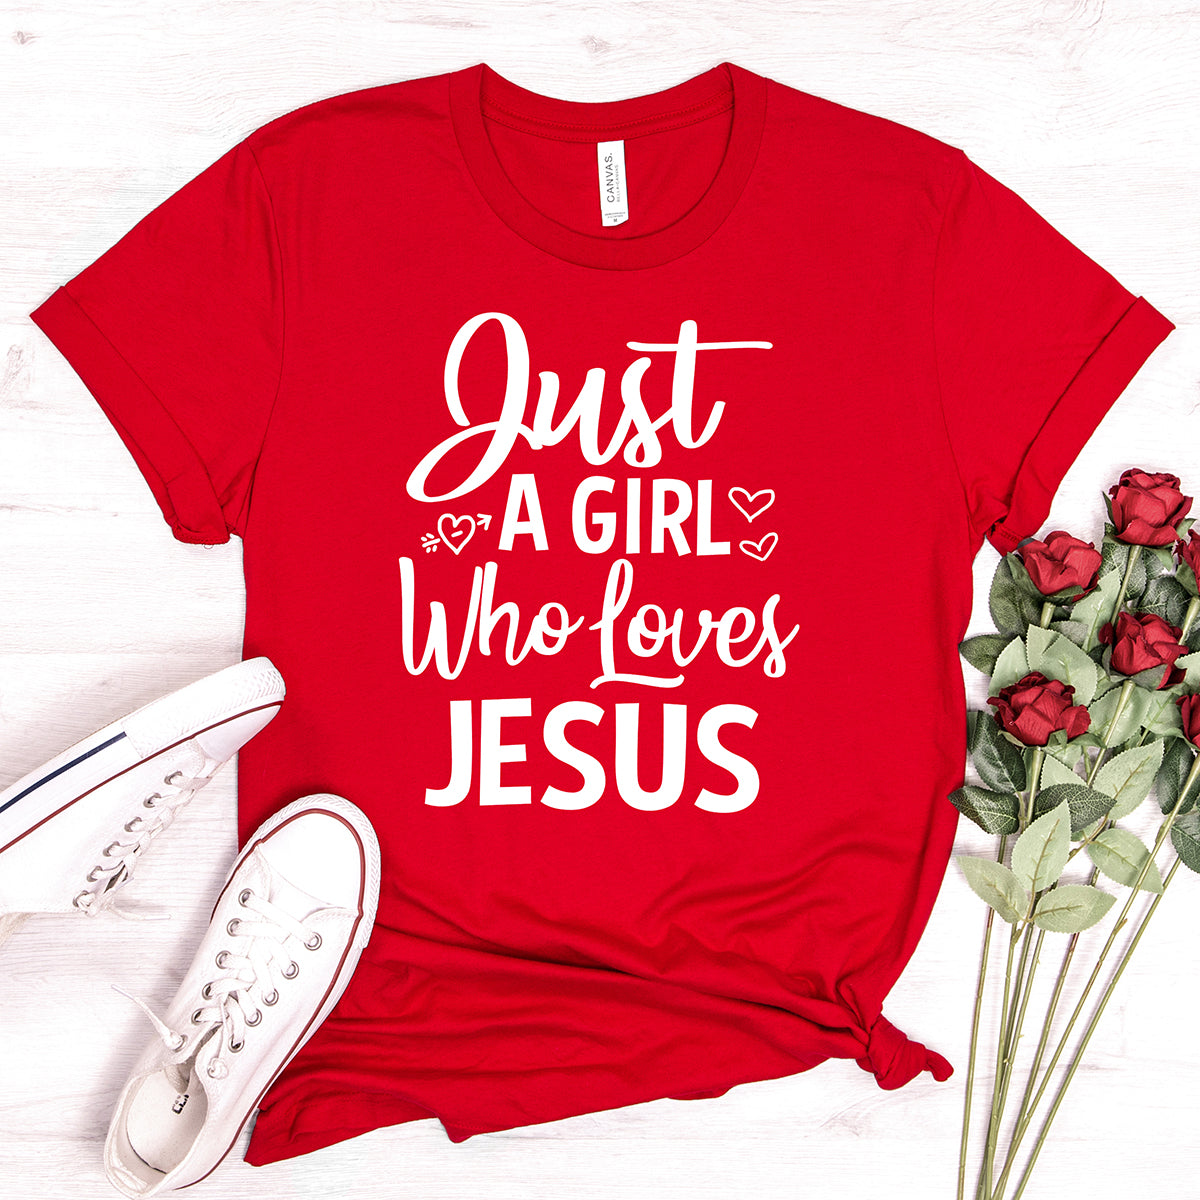 Just A Girl Who Loves Jesus T-shirt